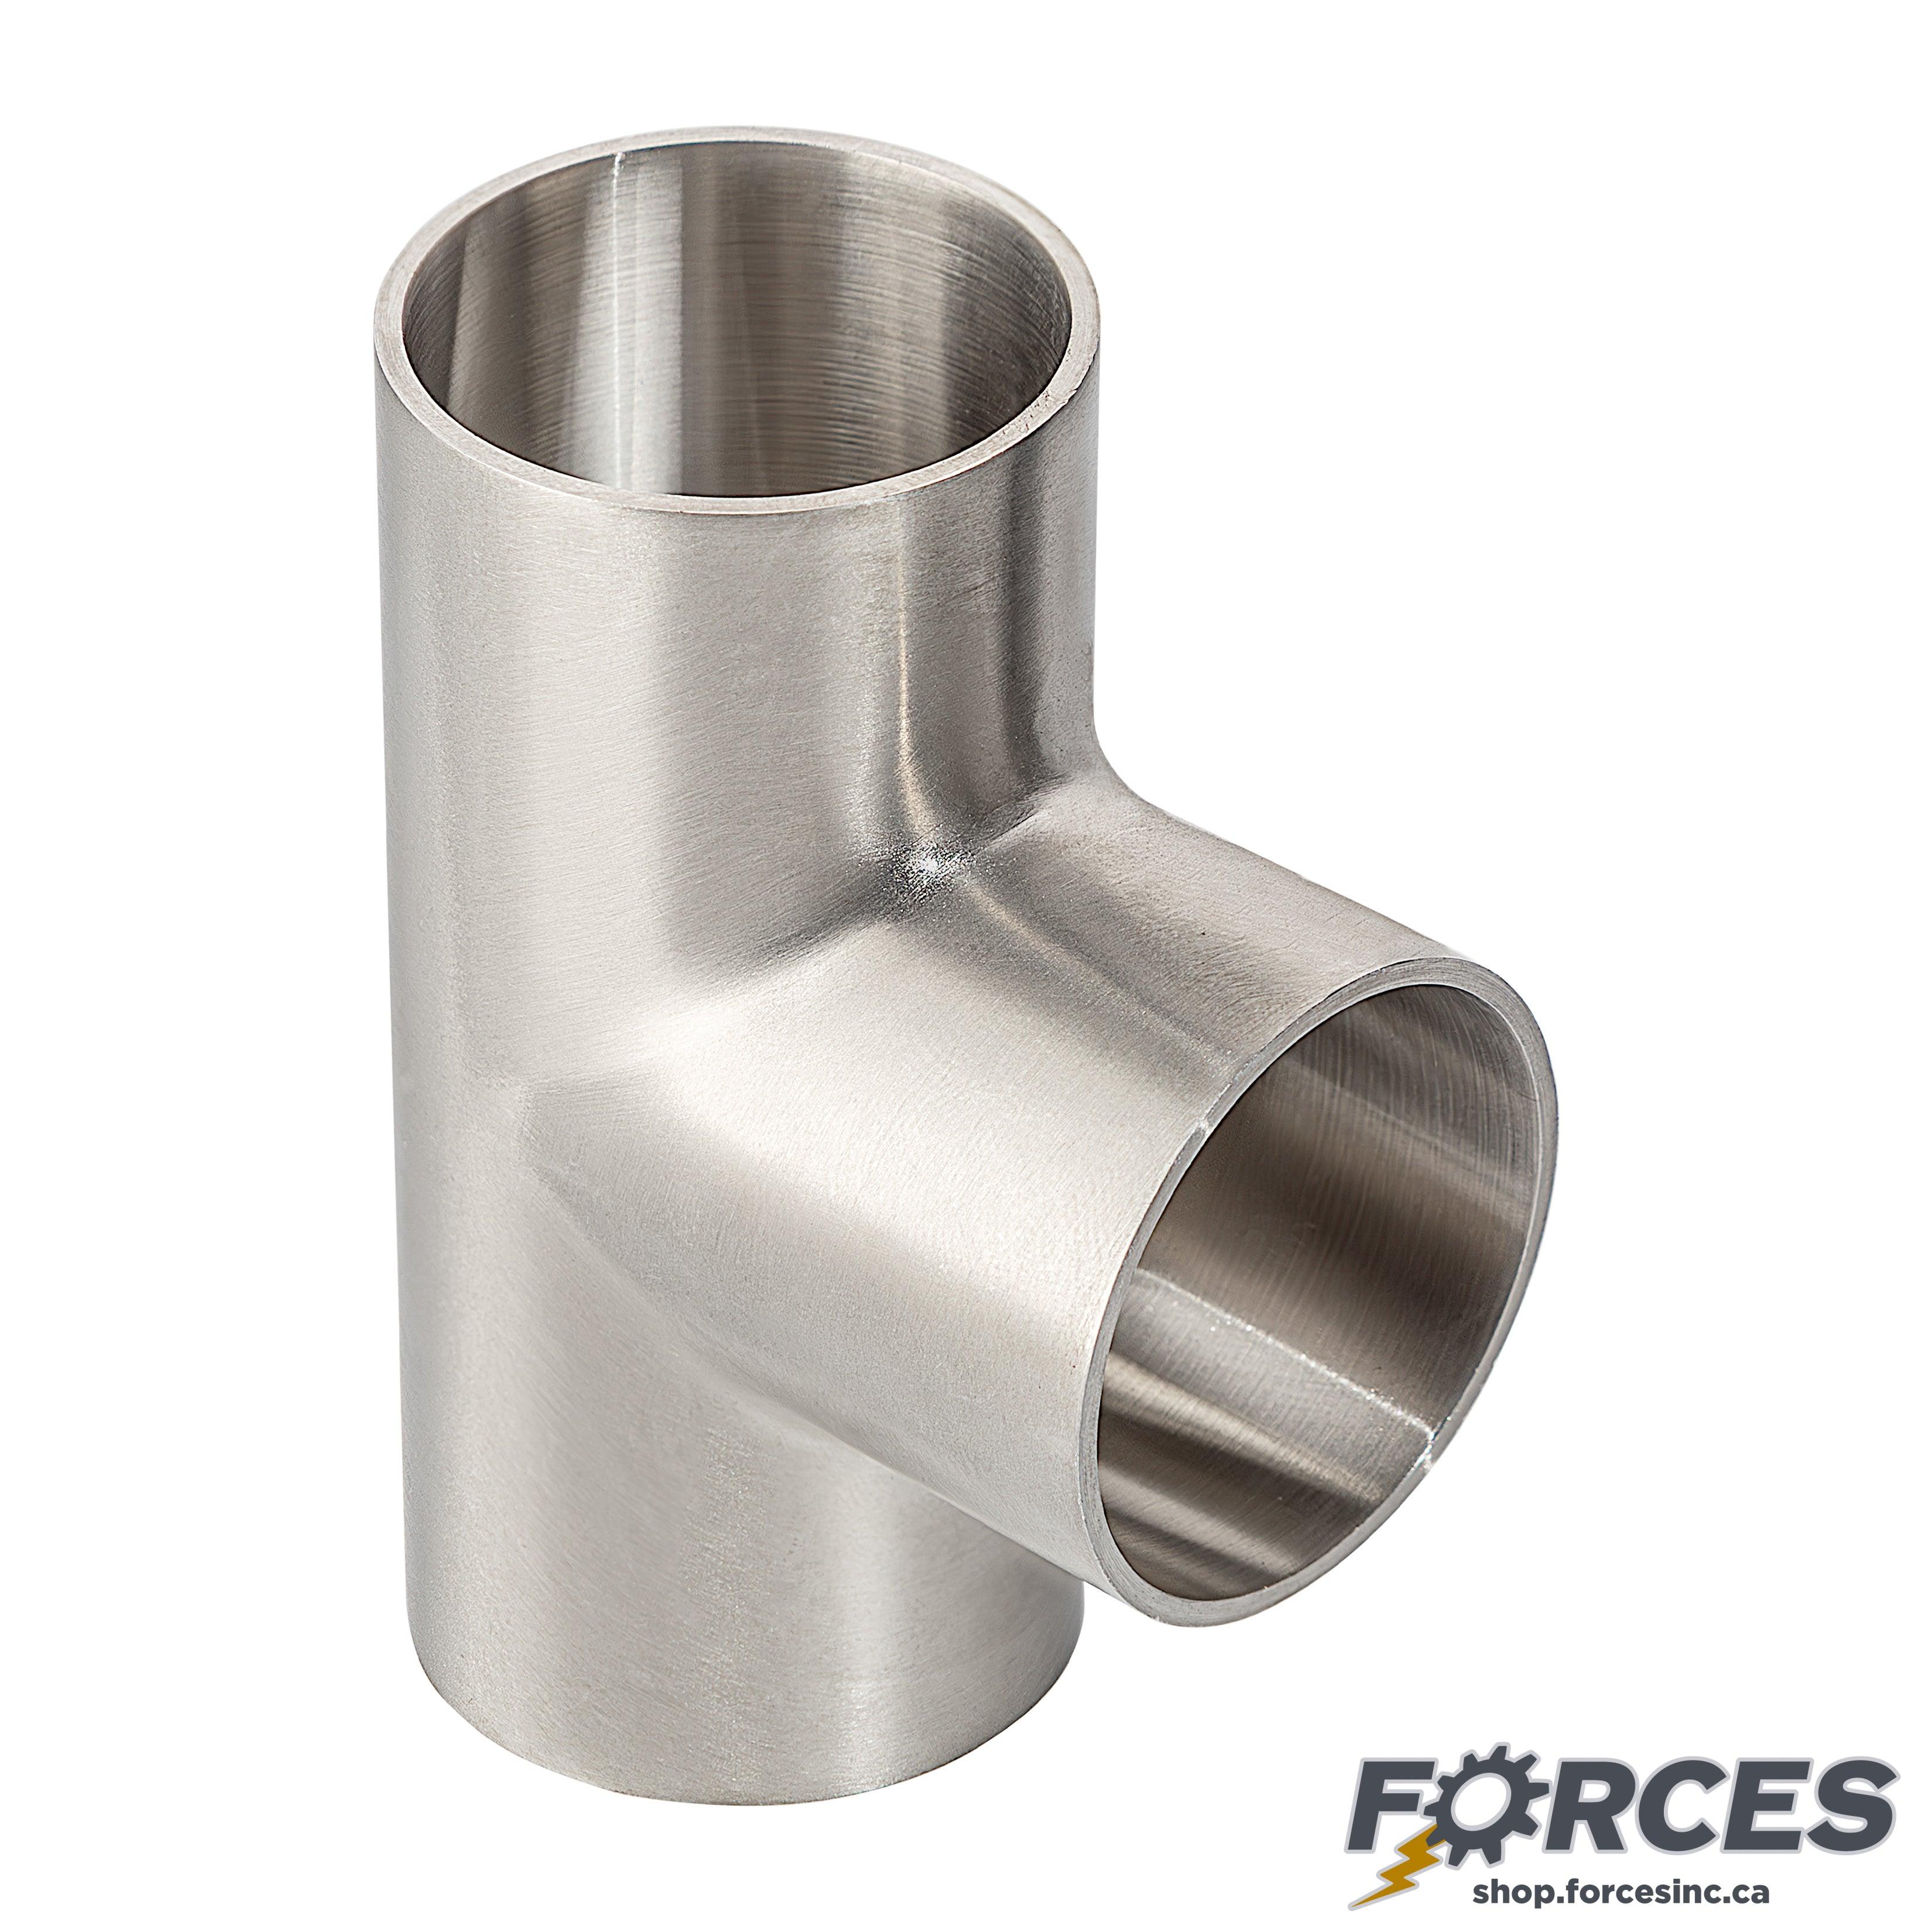 1" Butt Weld Short Tee - Stainless Steel 304 - Forces Inc